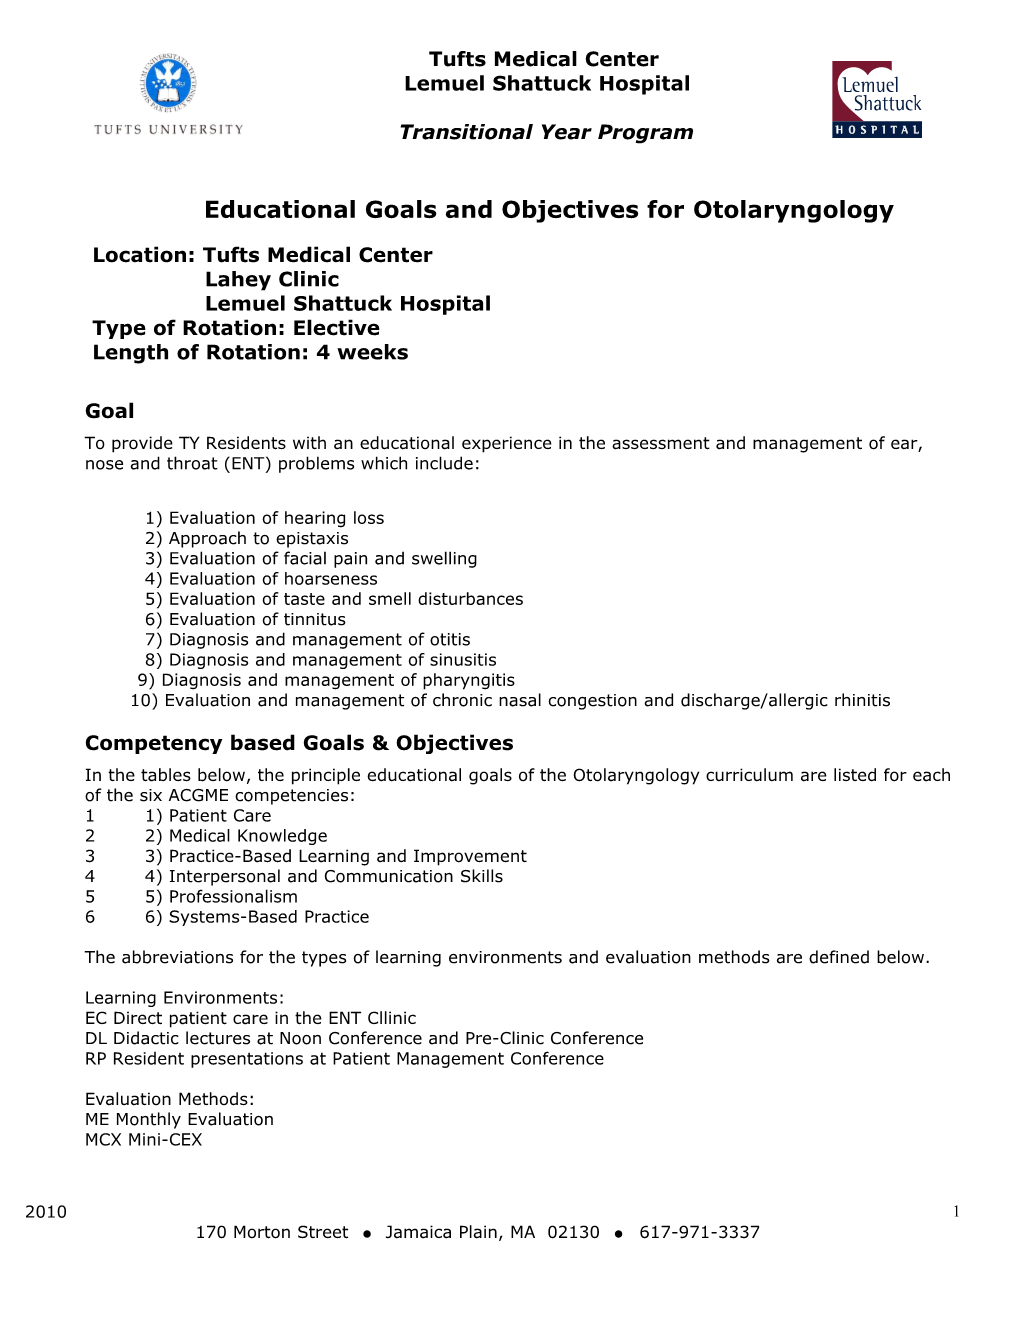 Educational Goals and Objectives for Otolaryngology